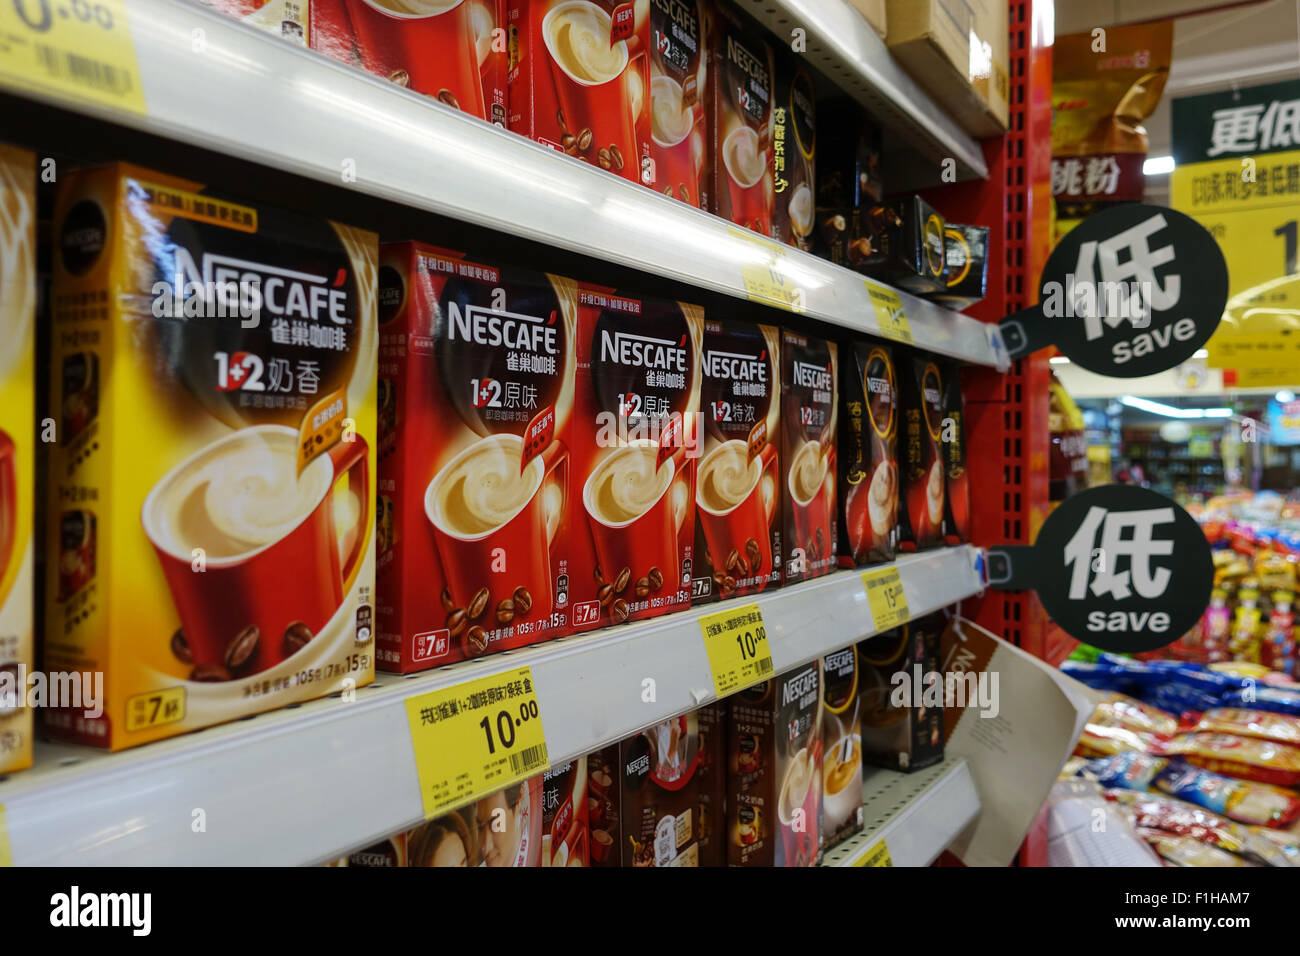 Products from the brand Nescafé from the manufactorer Nestlé are being sold at a supermarket in Shanghai, China, 31 August 2015.  Photo: Jens Kalaene/dpa Stock Photo